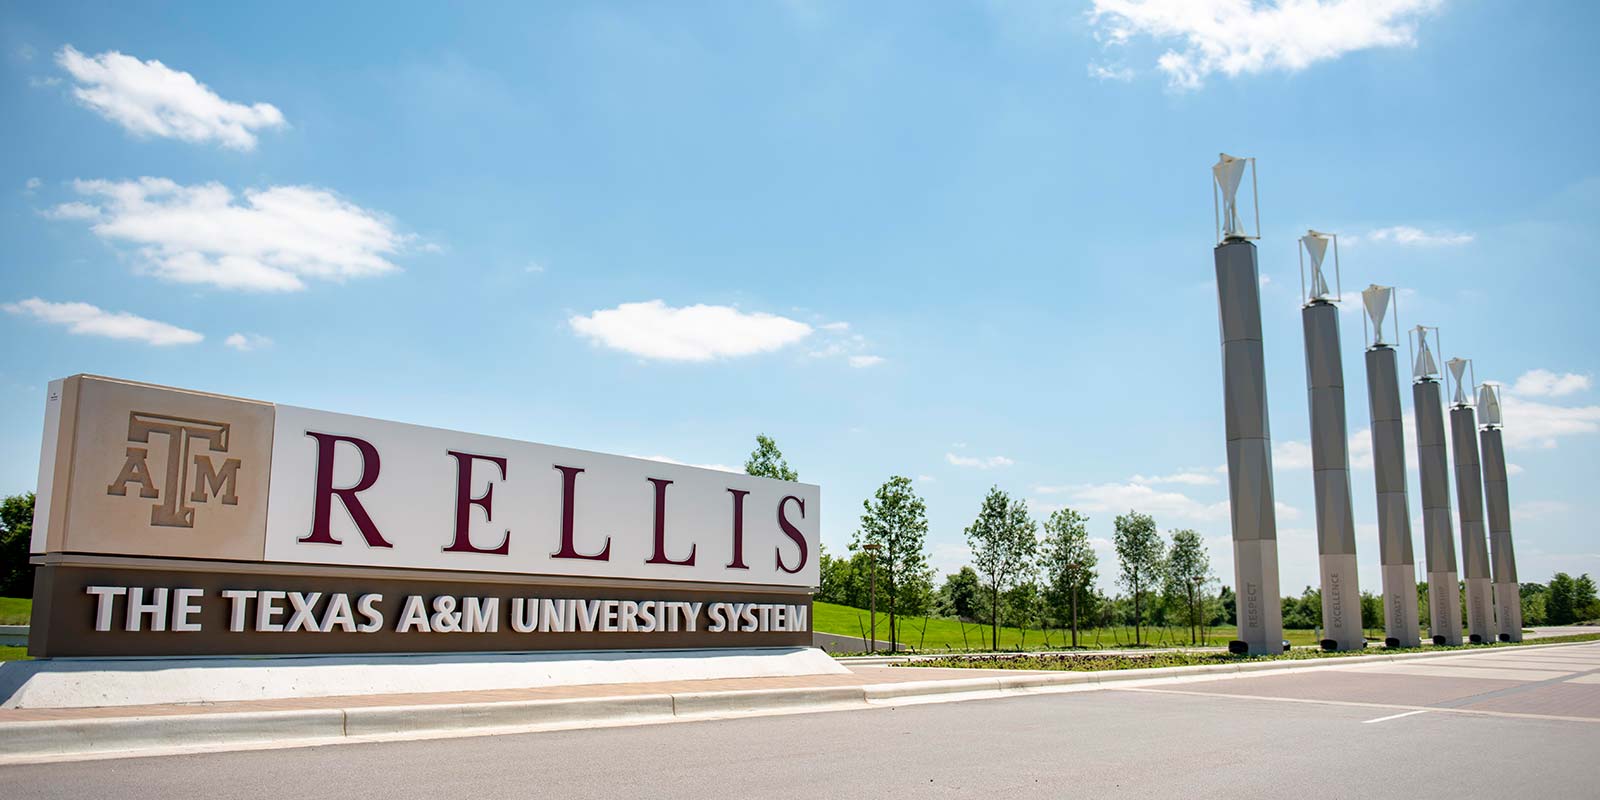 The Texas A&M University System RELLIS campus monument sign.